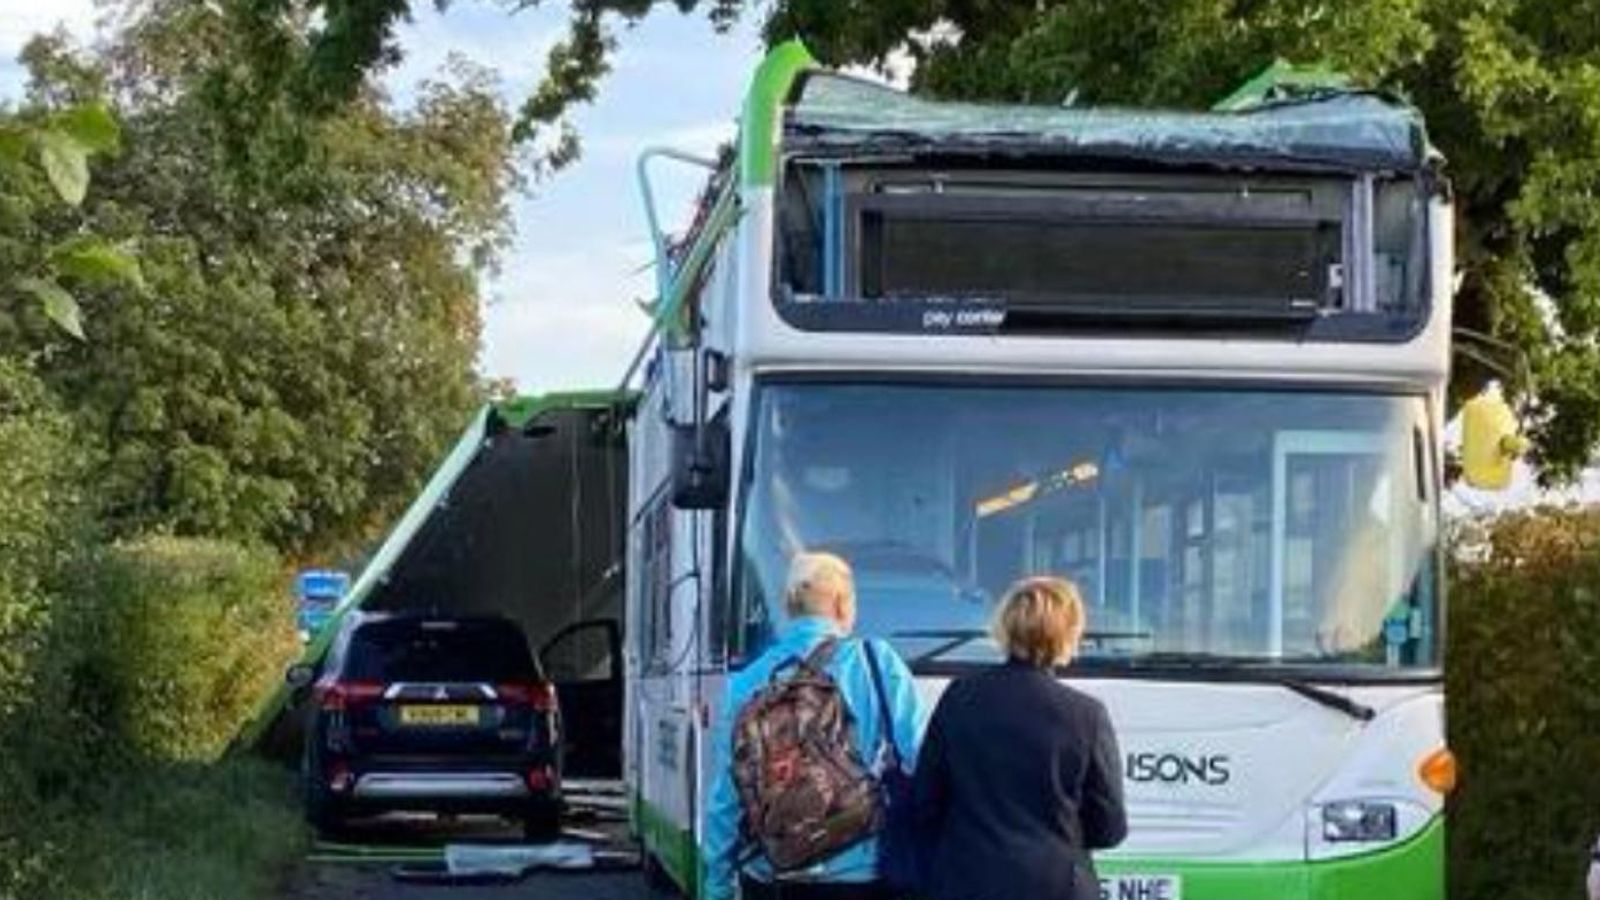 Children taken to hospital after bus roof ripped off in Essex crash